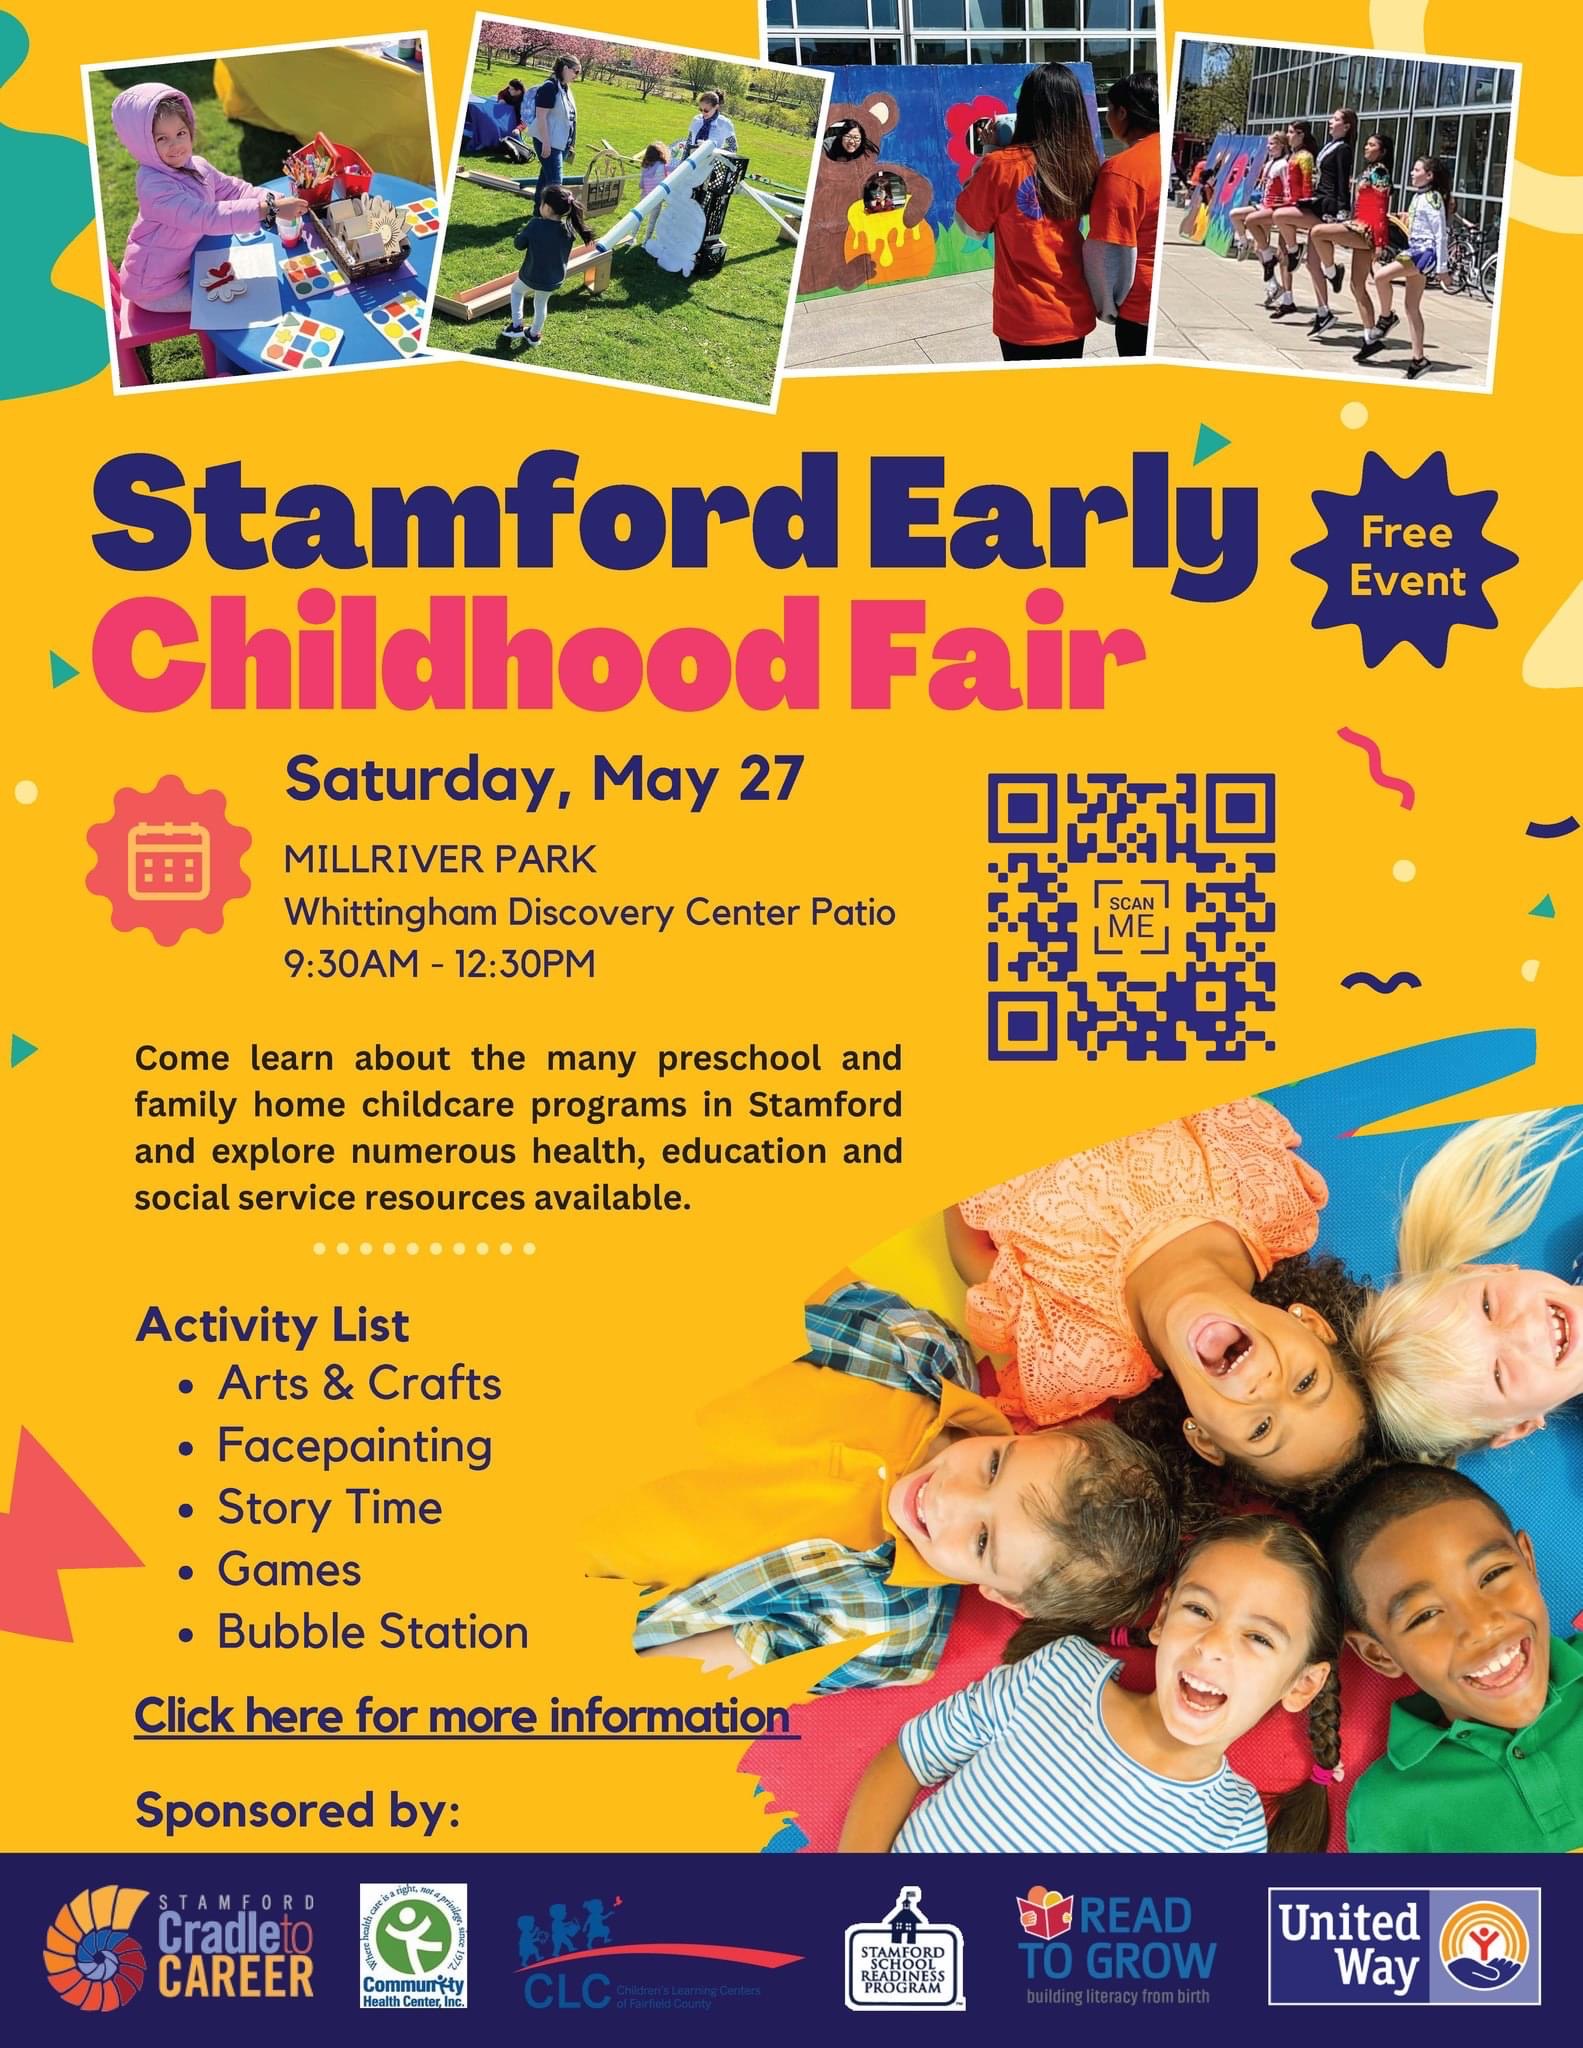 The Stamford Early Childhood Fair will occur Saturday May 27 from 9:30 am-12:30 pm at Mill River Park